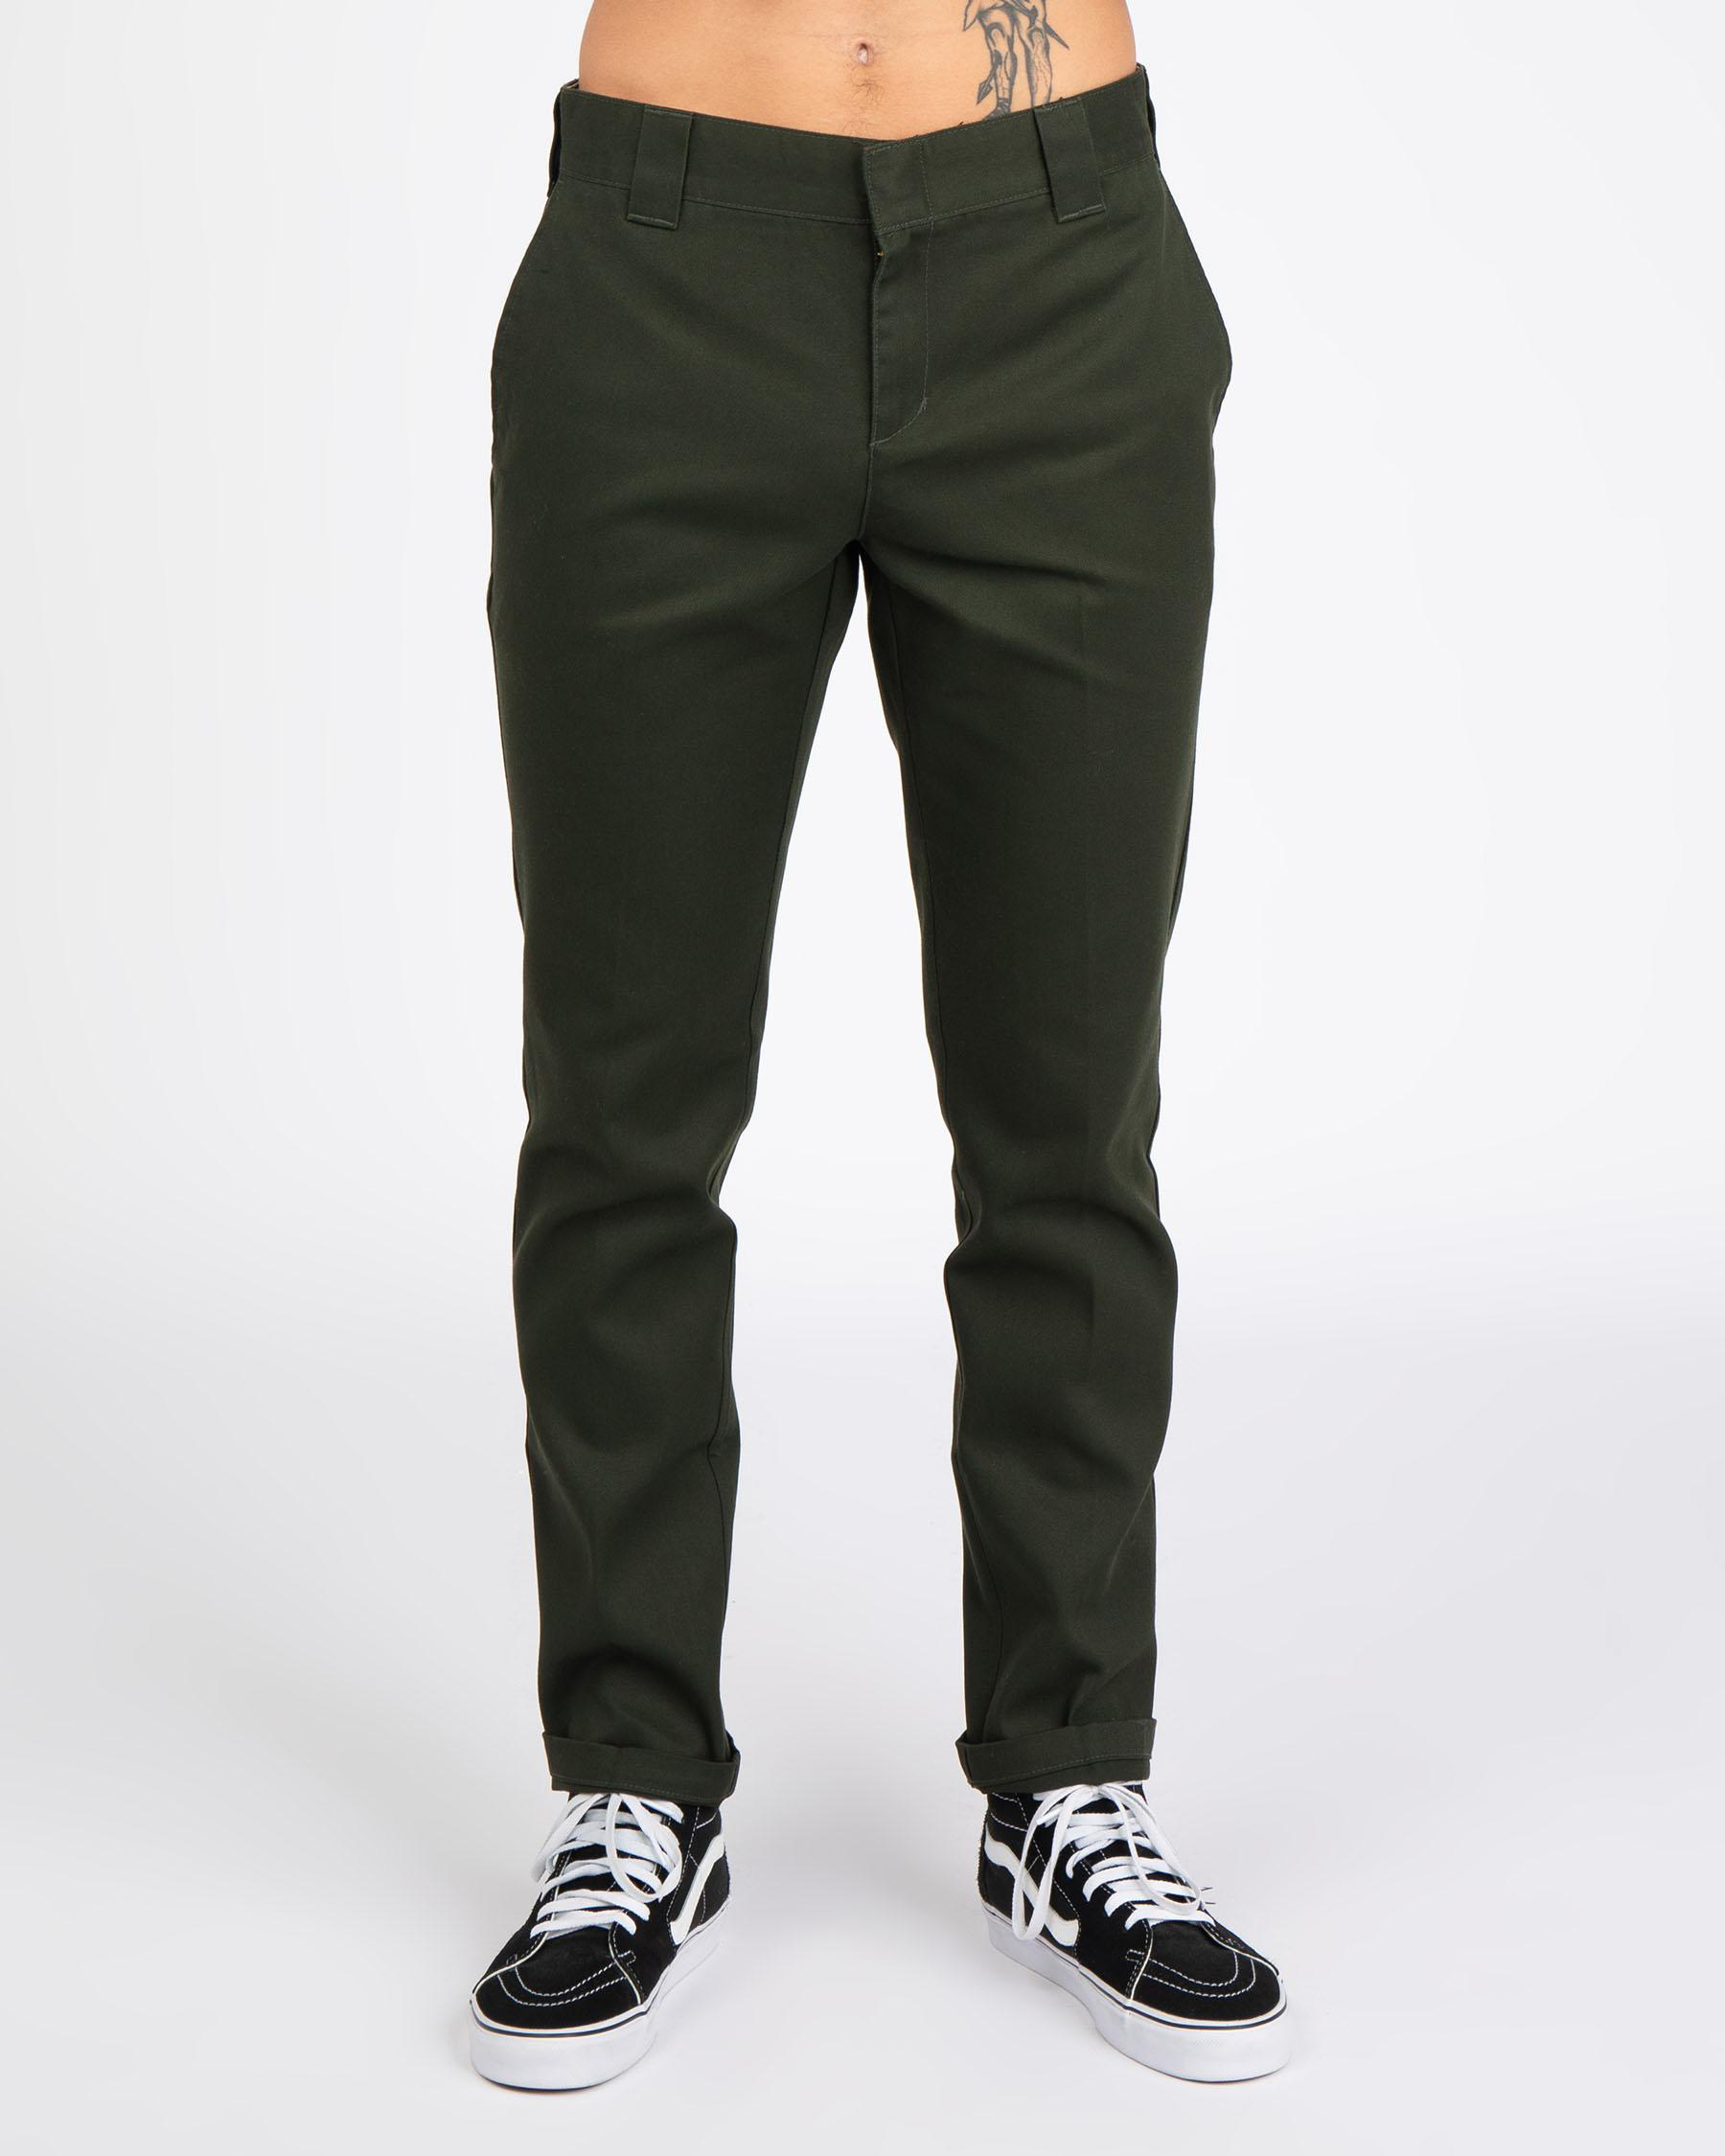 Dickies Slim Tapered Fit WE872 Pants In Olive Green - Fast Shipping ...